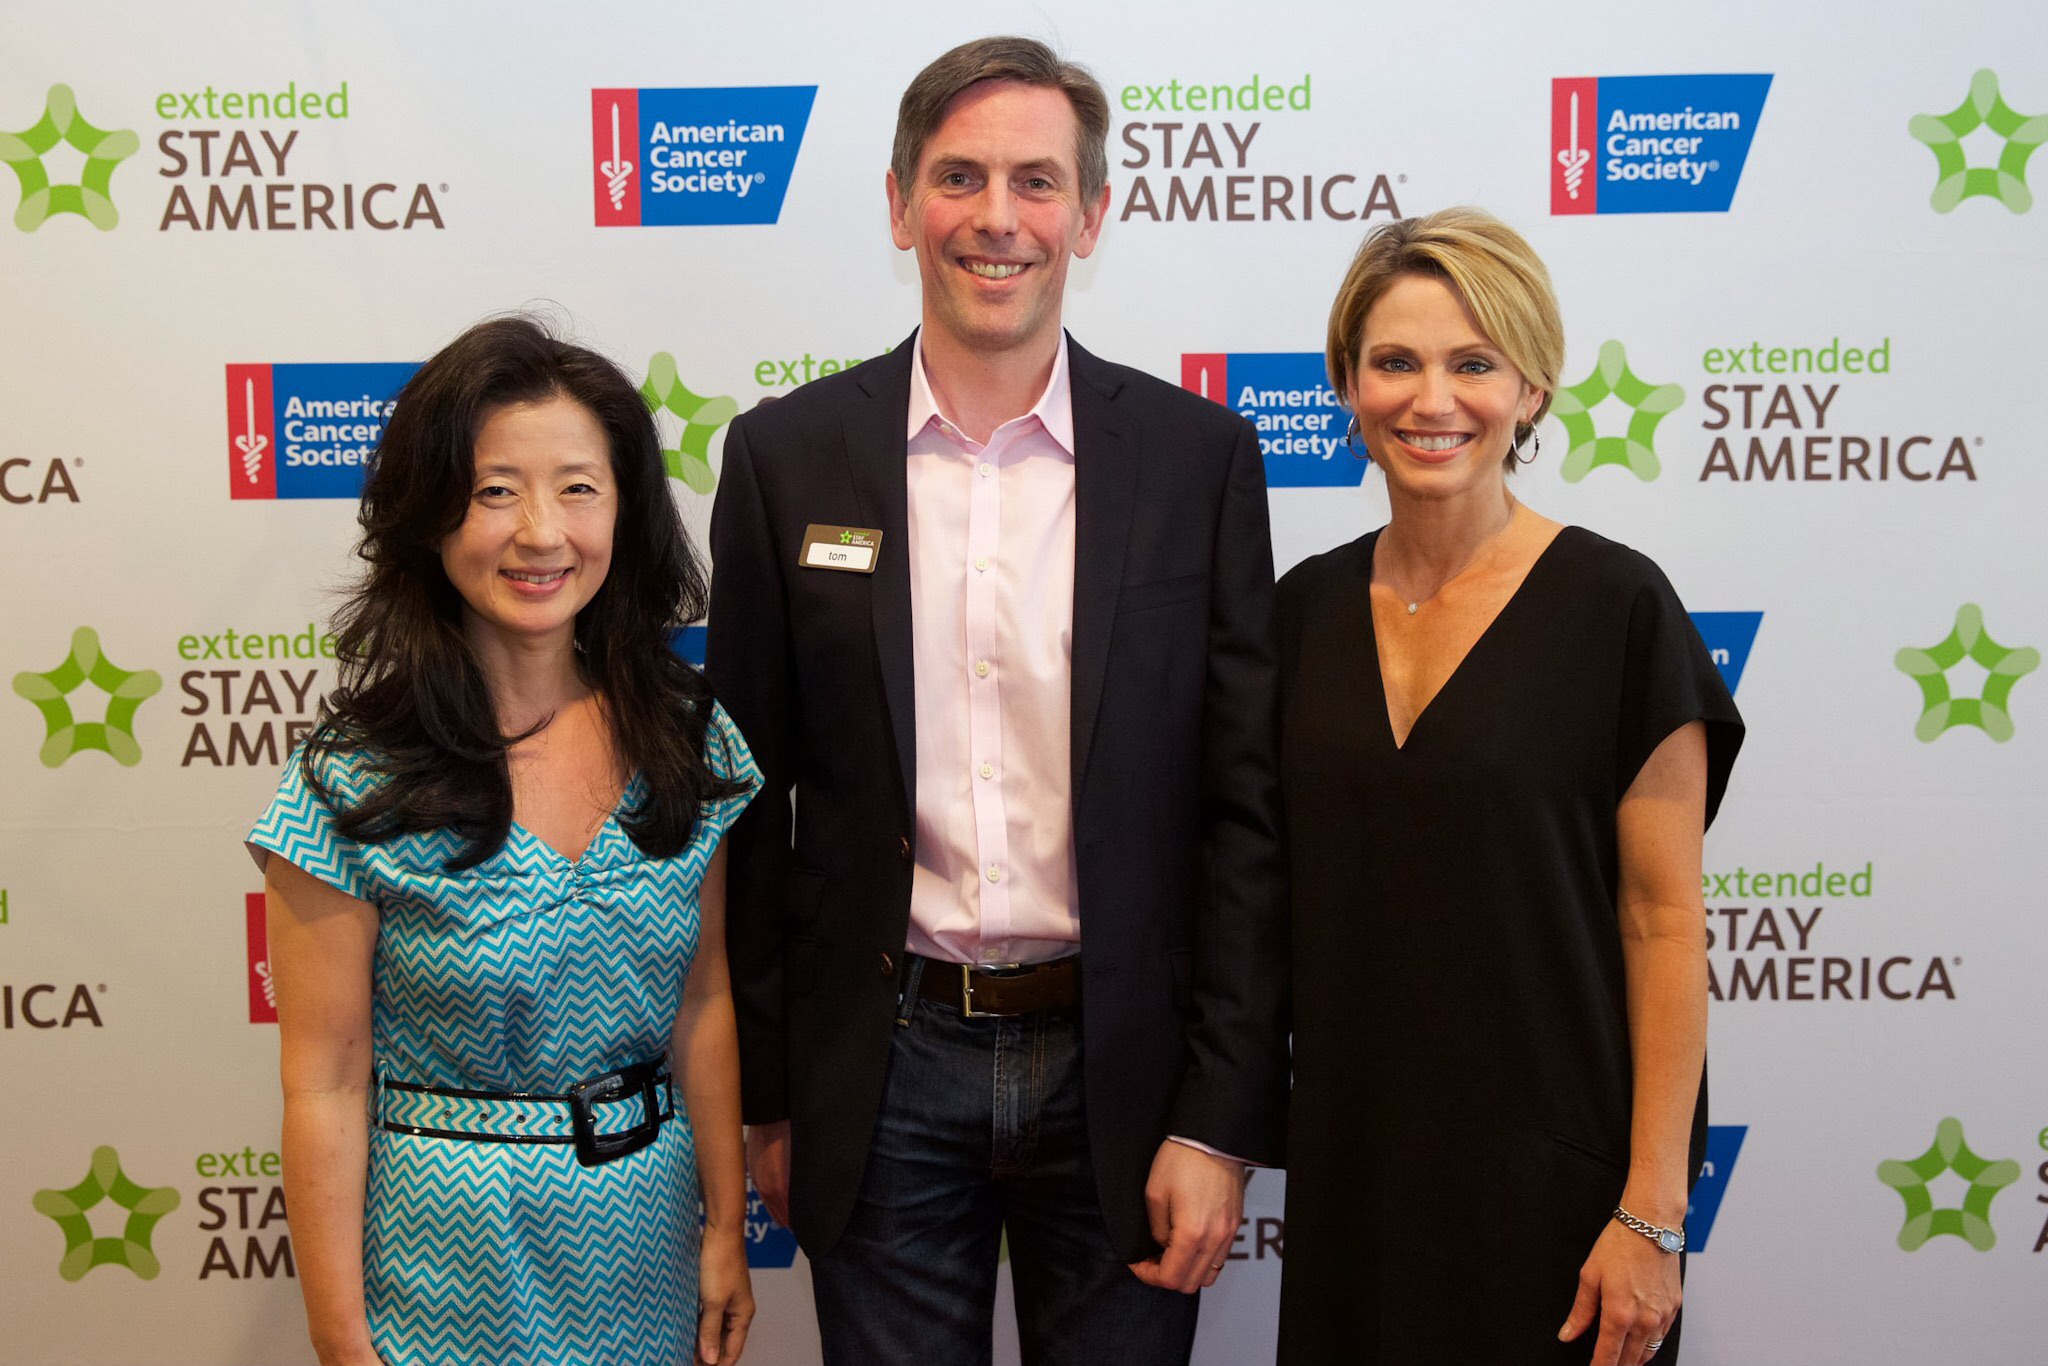 Amy Robach with Extended Stay America CMO Tom Seddon and ACS EVP Kris Kim